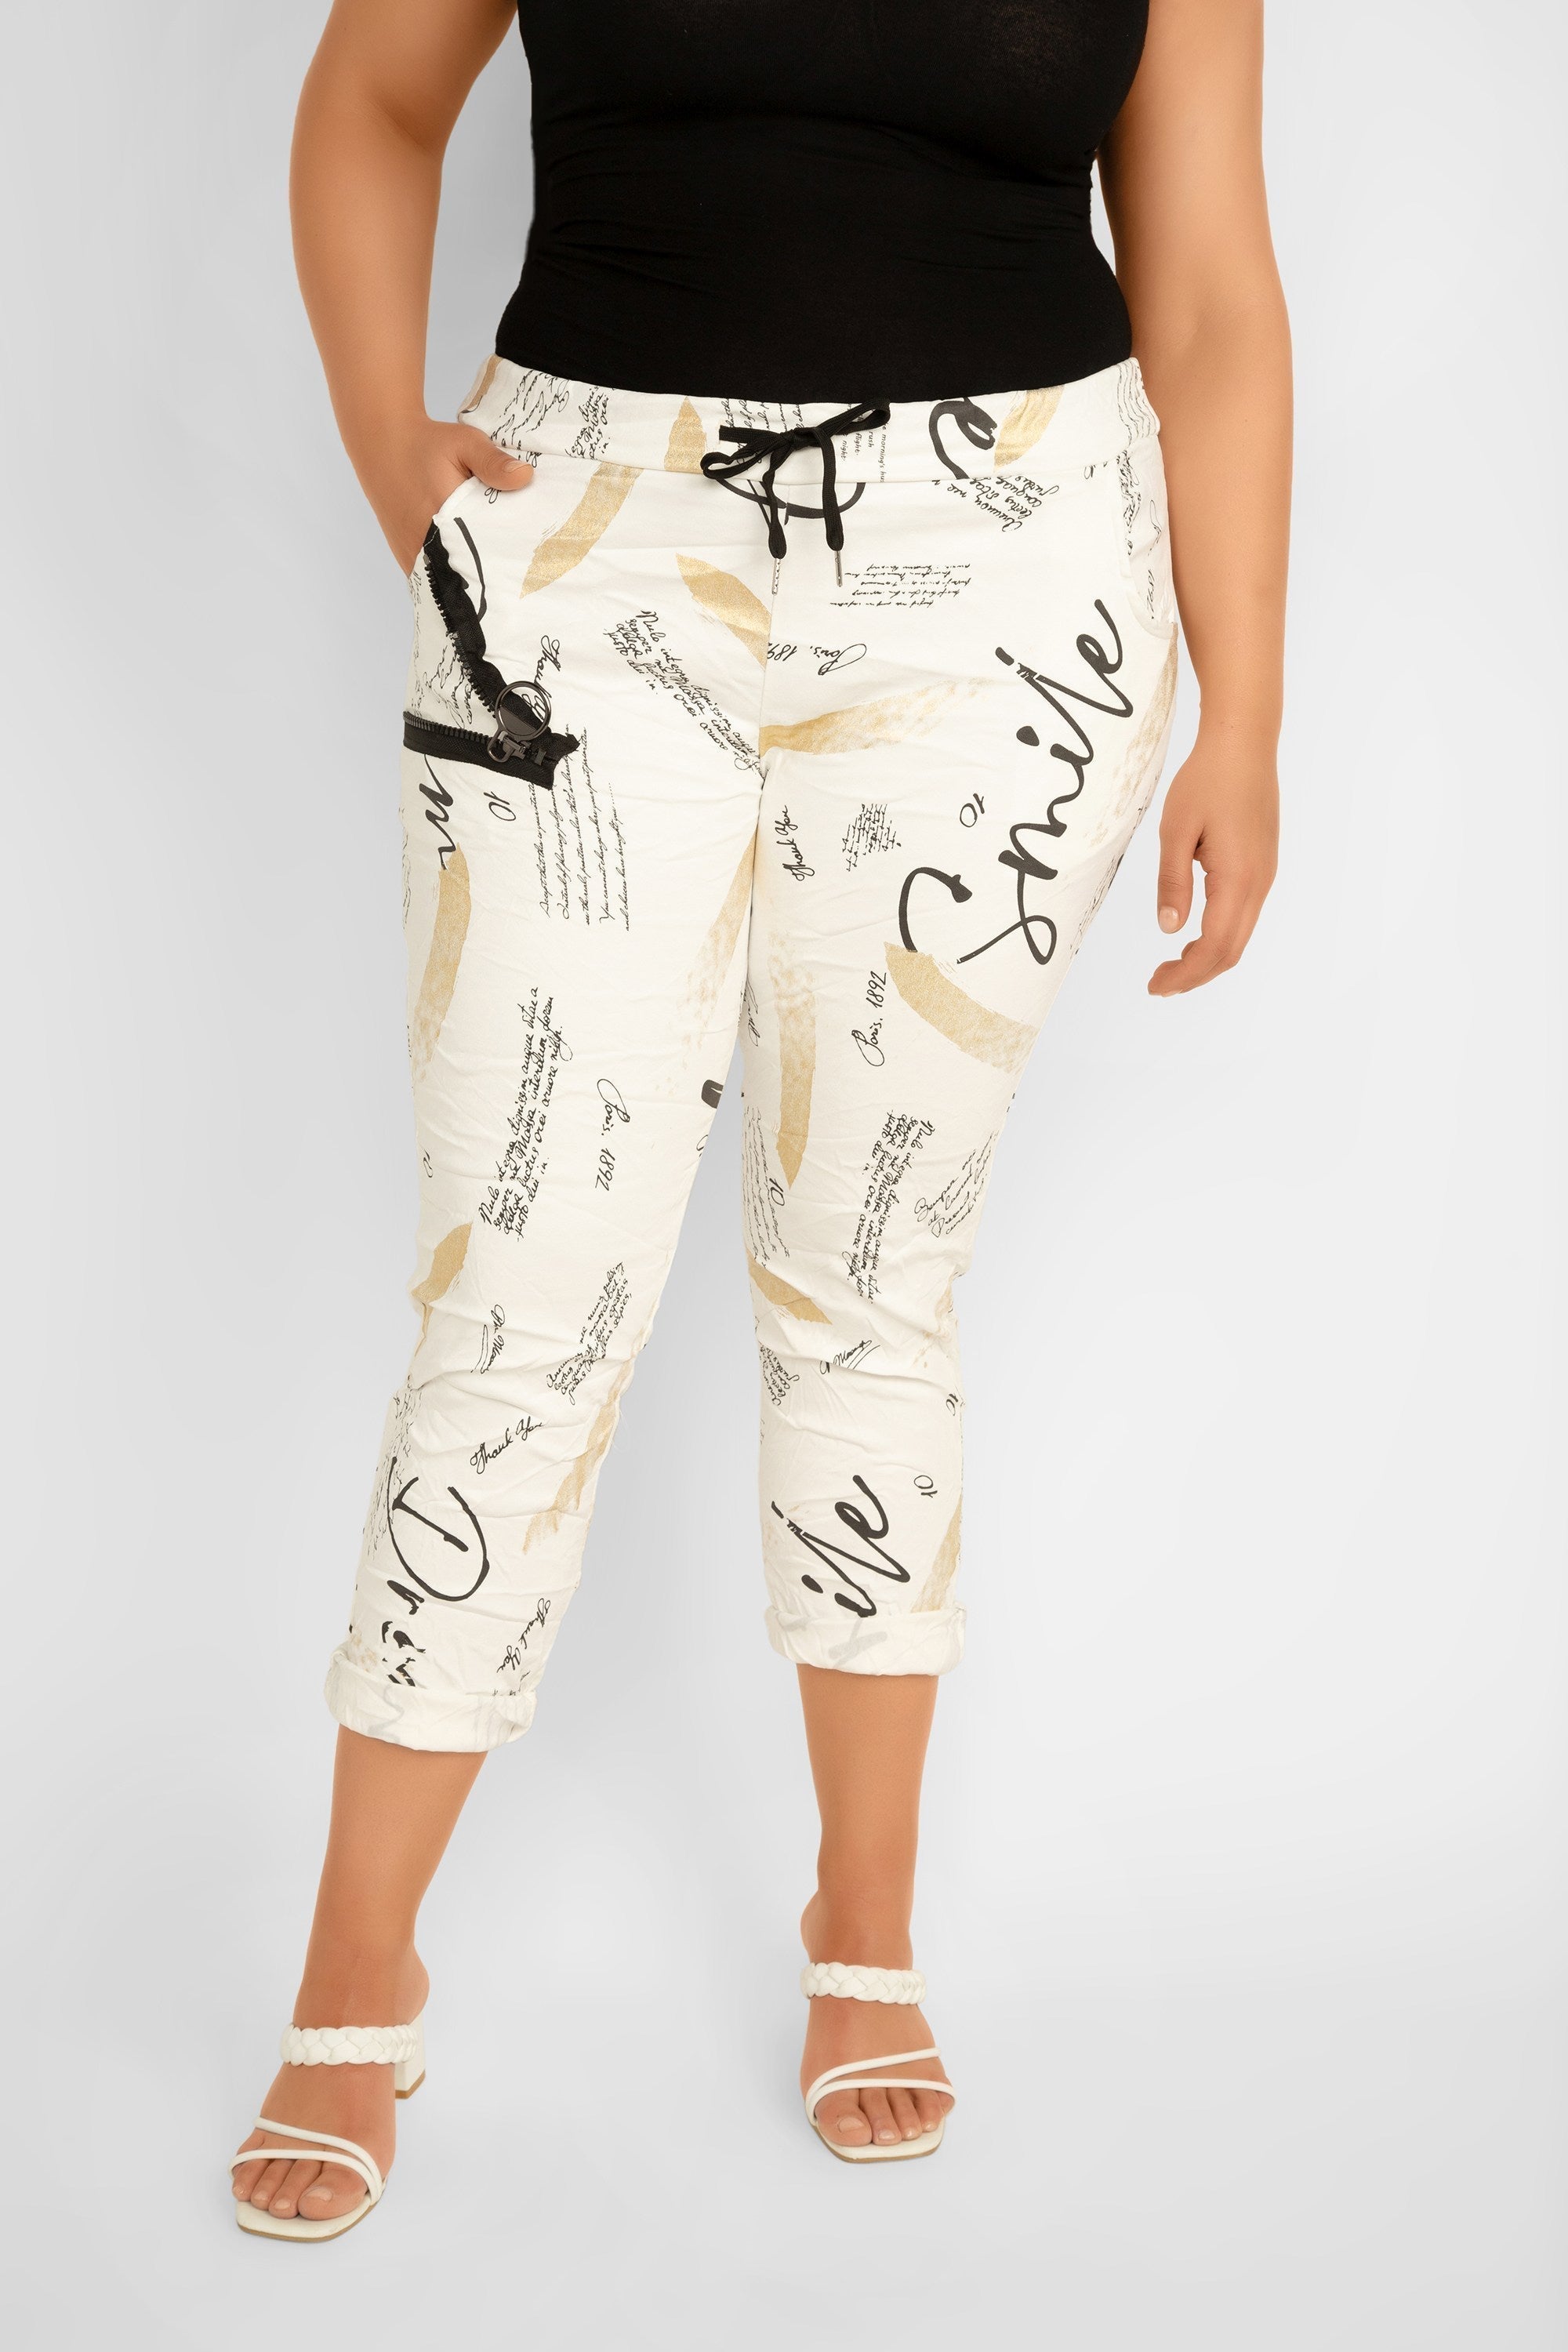 Bella Amore (68511) Women's Cropped Diagonal Zipper Pocket Pants in a Graphic print featuring black topography and gold foil streaks over a creamy white background